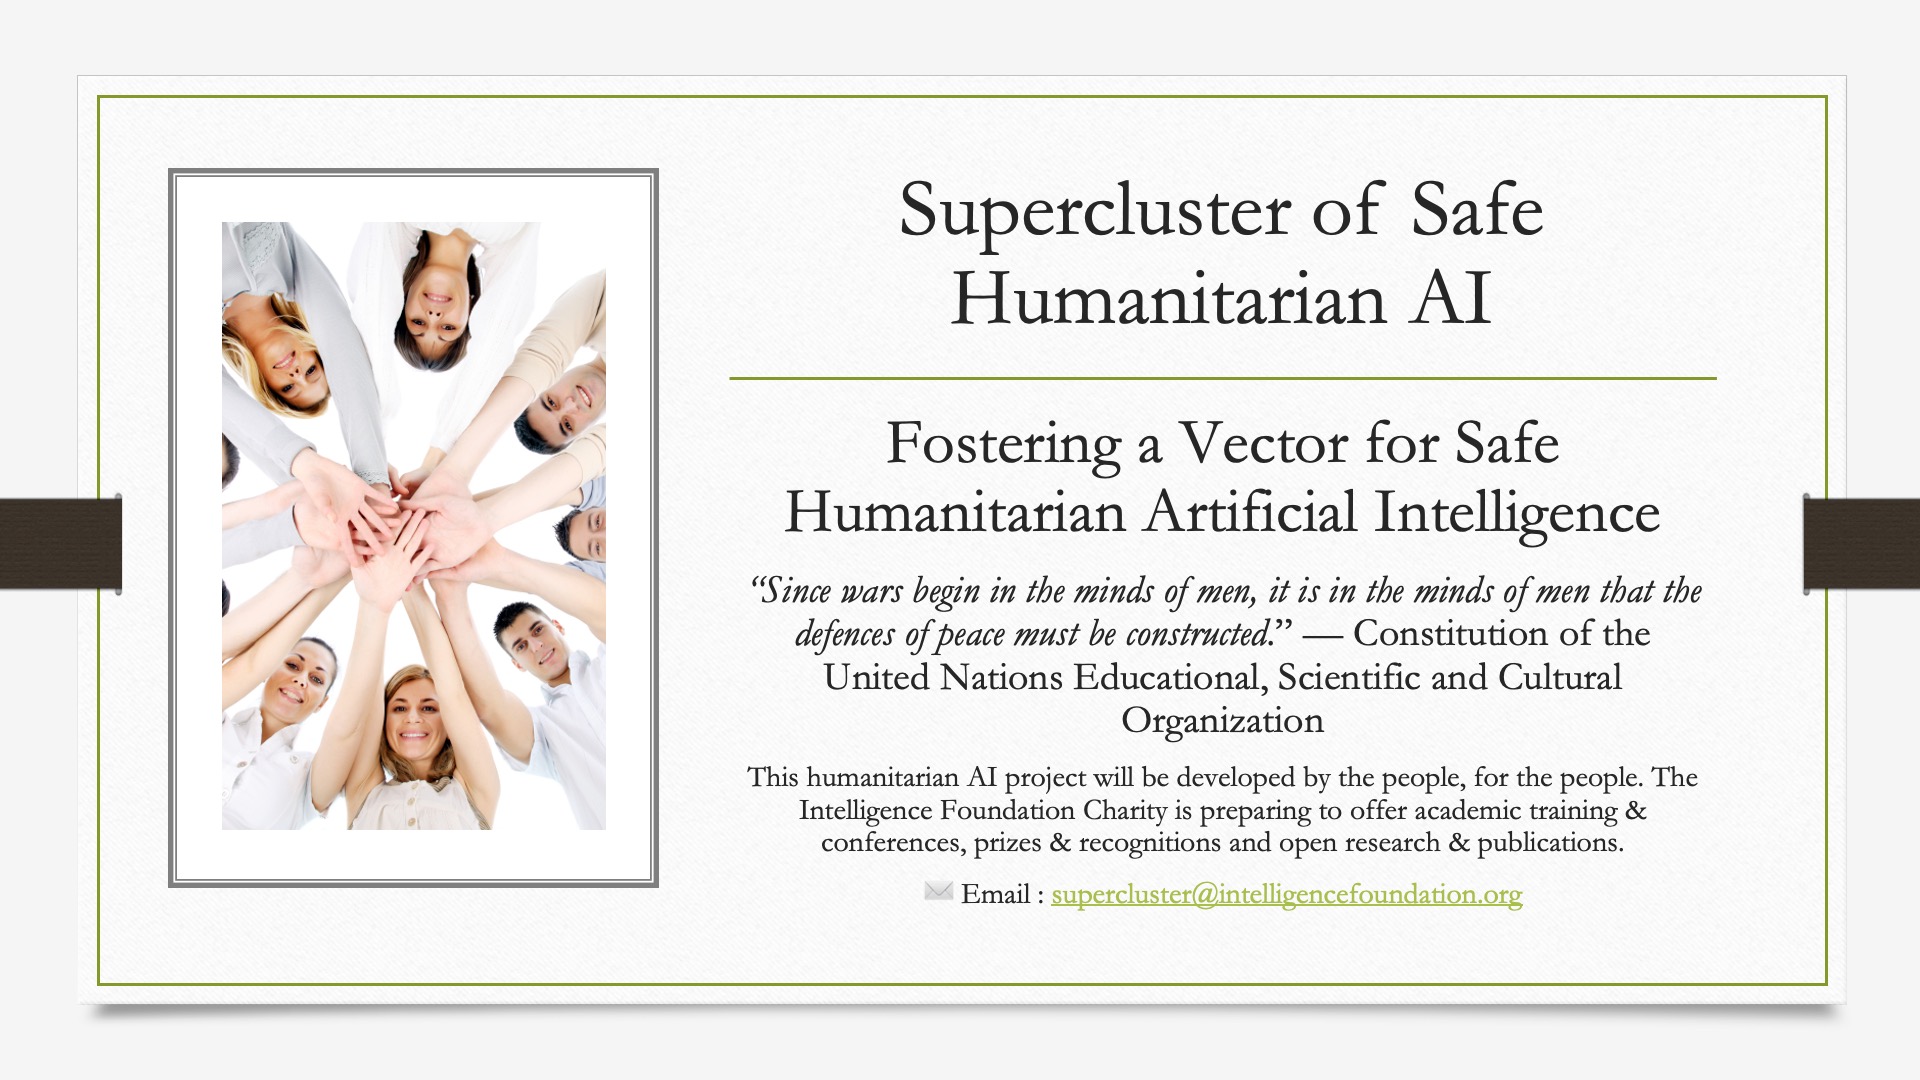 Supercluster of safe Humanitarian AI | Fostering a Vector for Safe Humanitarian Artificial Intelligence